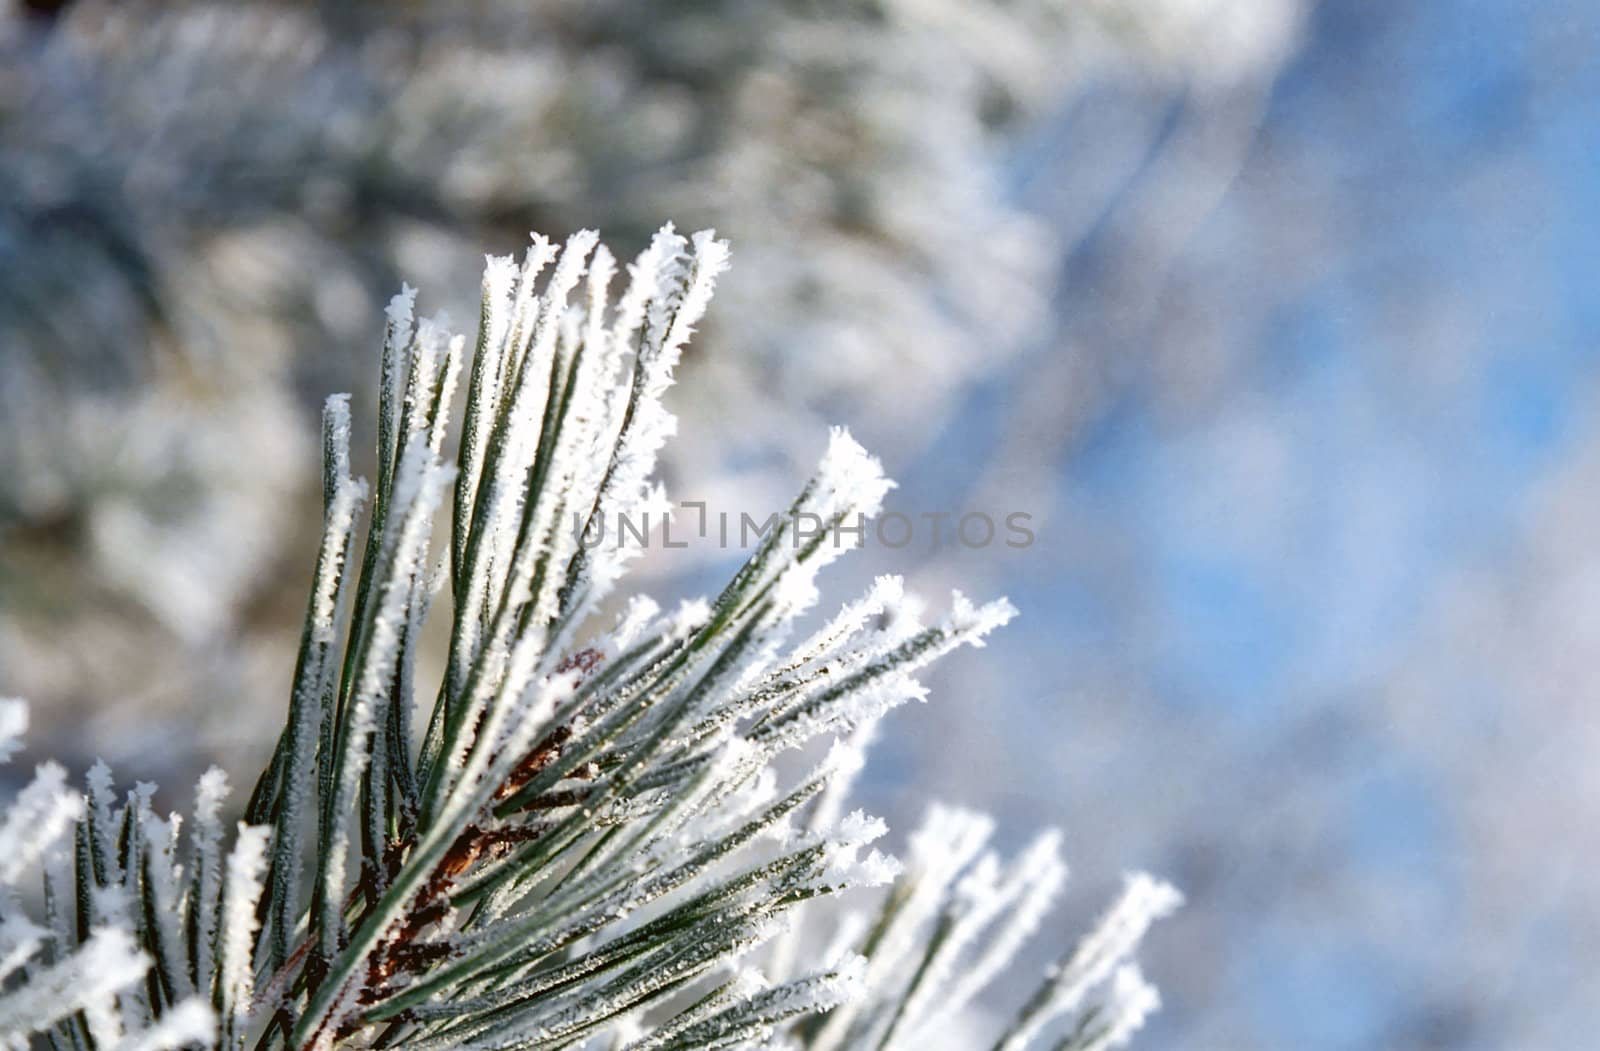 Hoarfrost on the needles of a pine tree by mulden